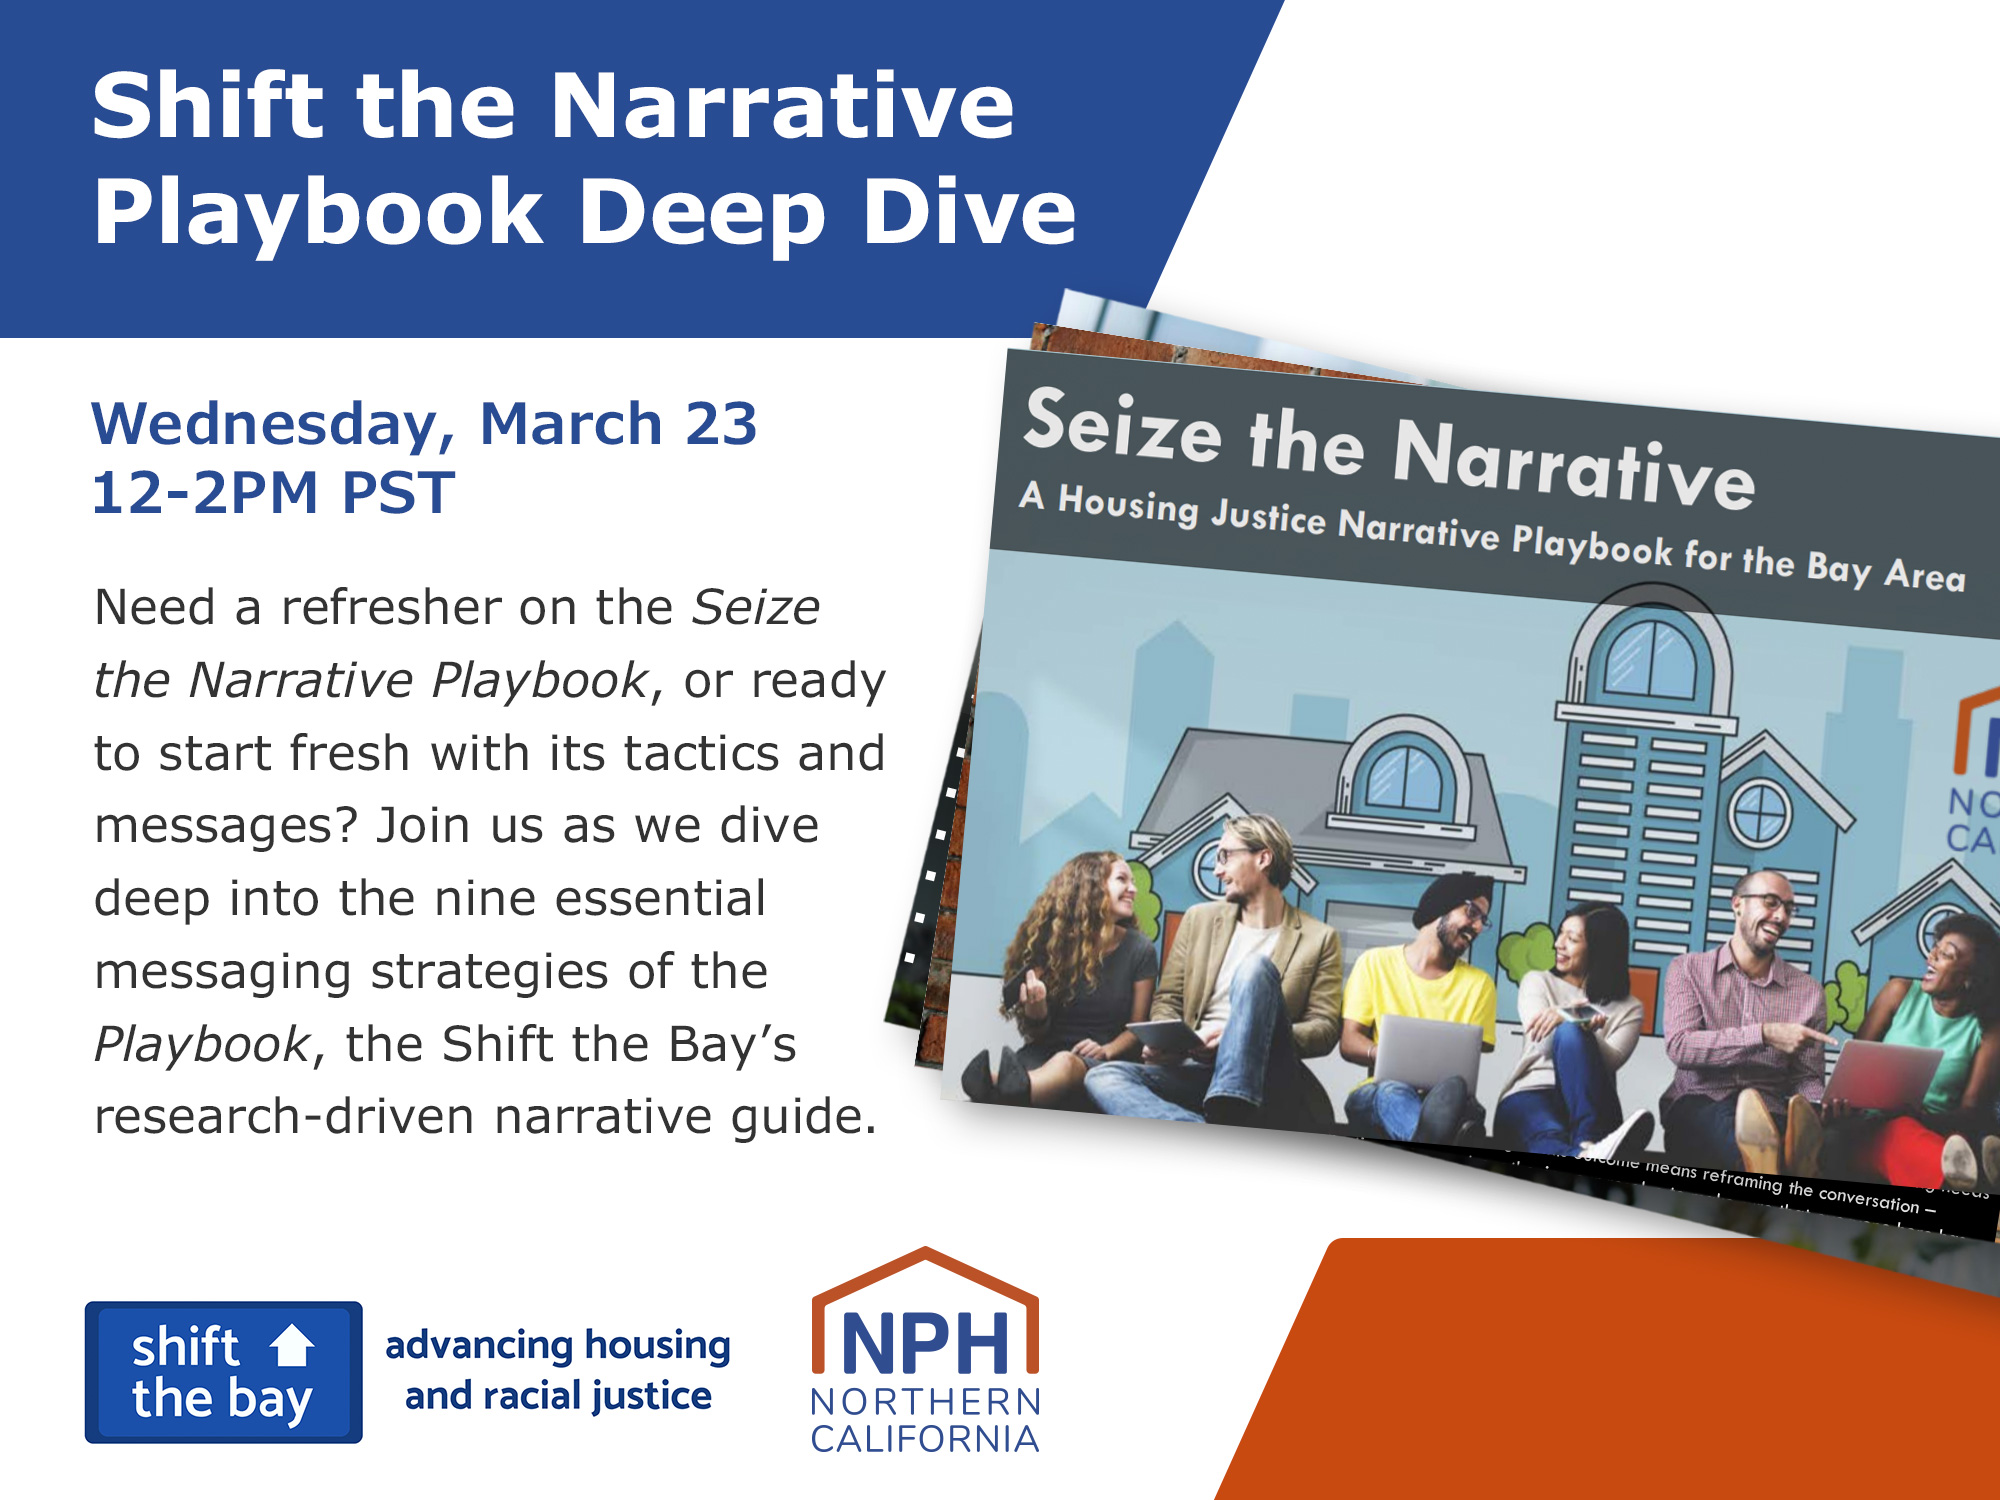 Event flyer for Playbook Deep Dive